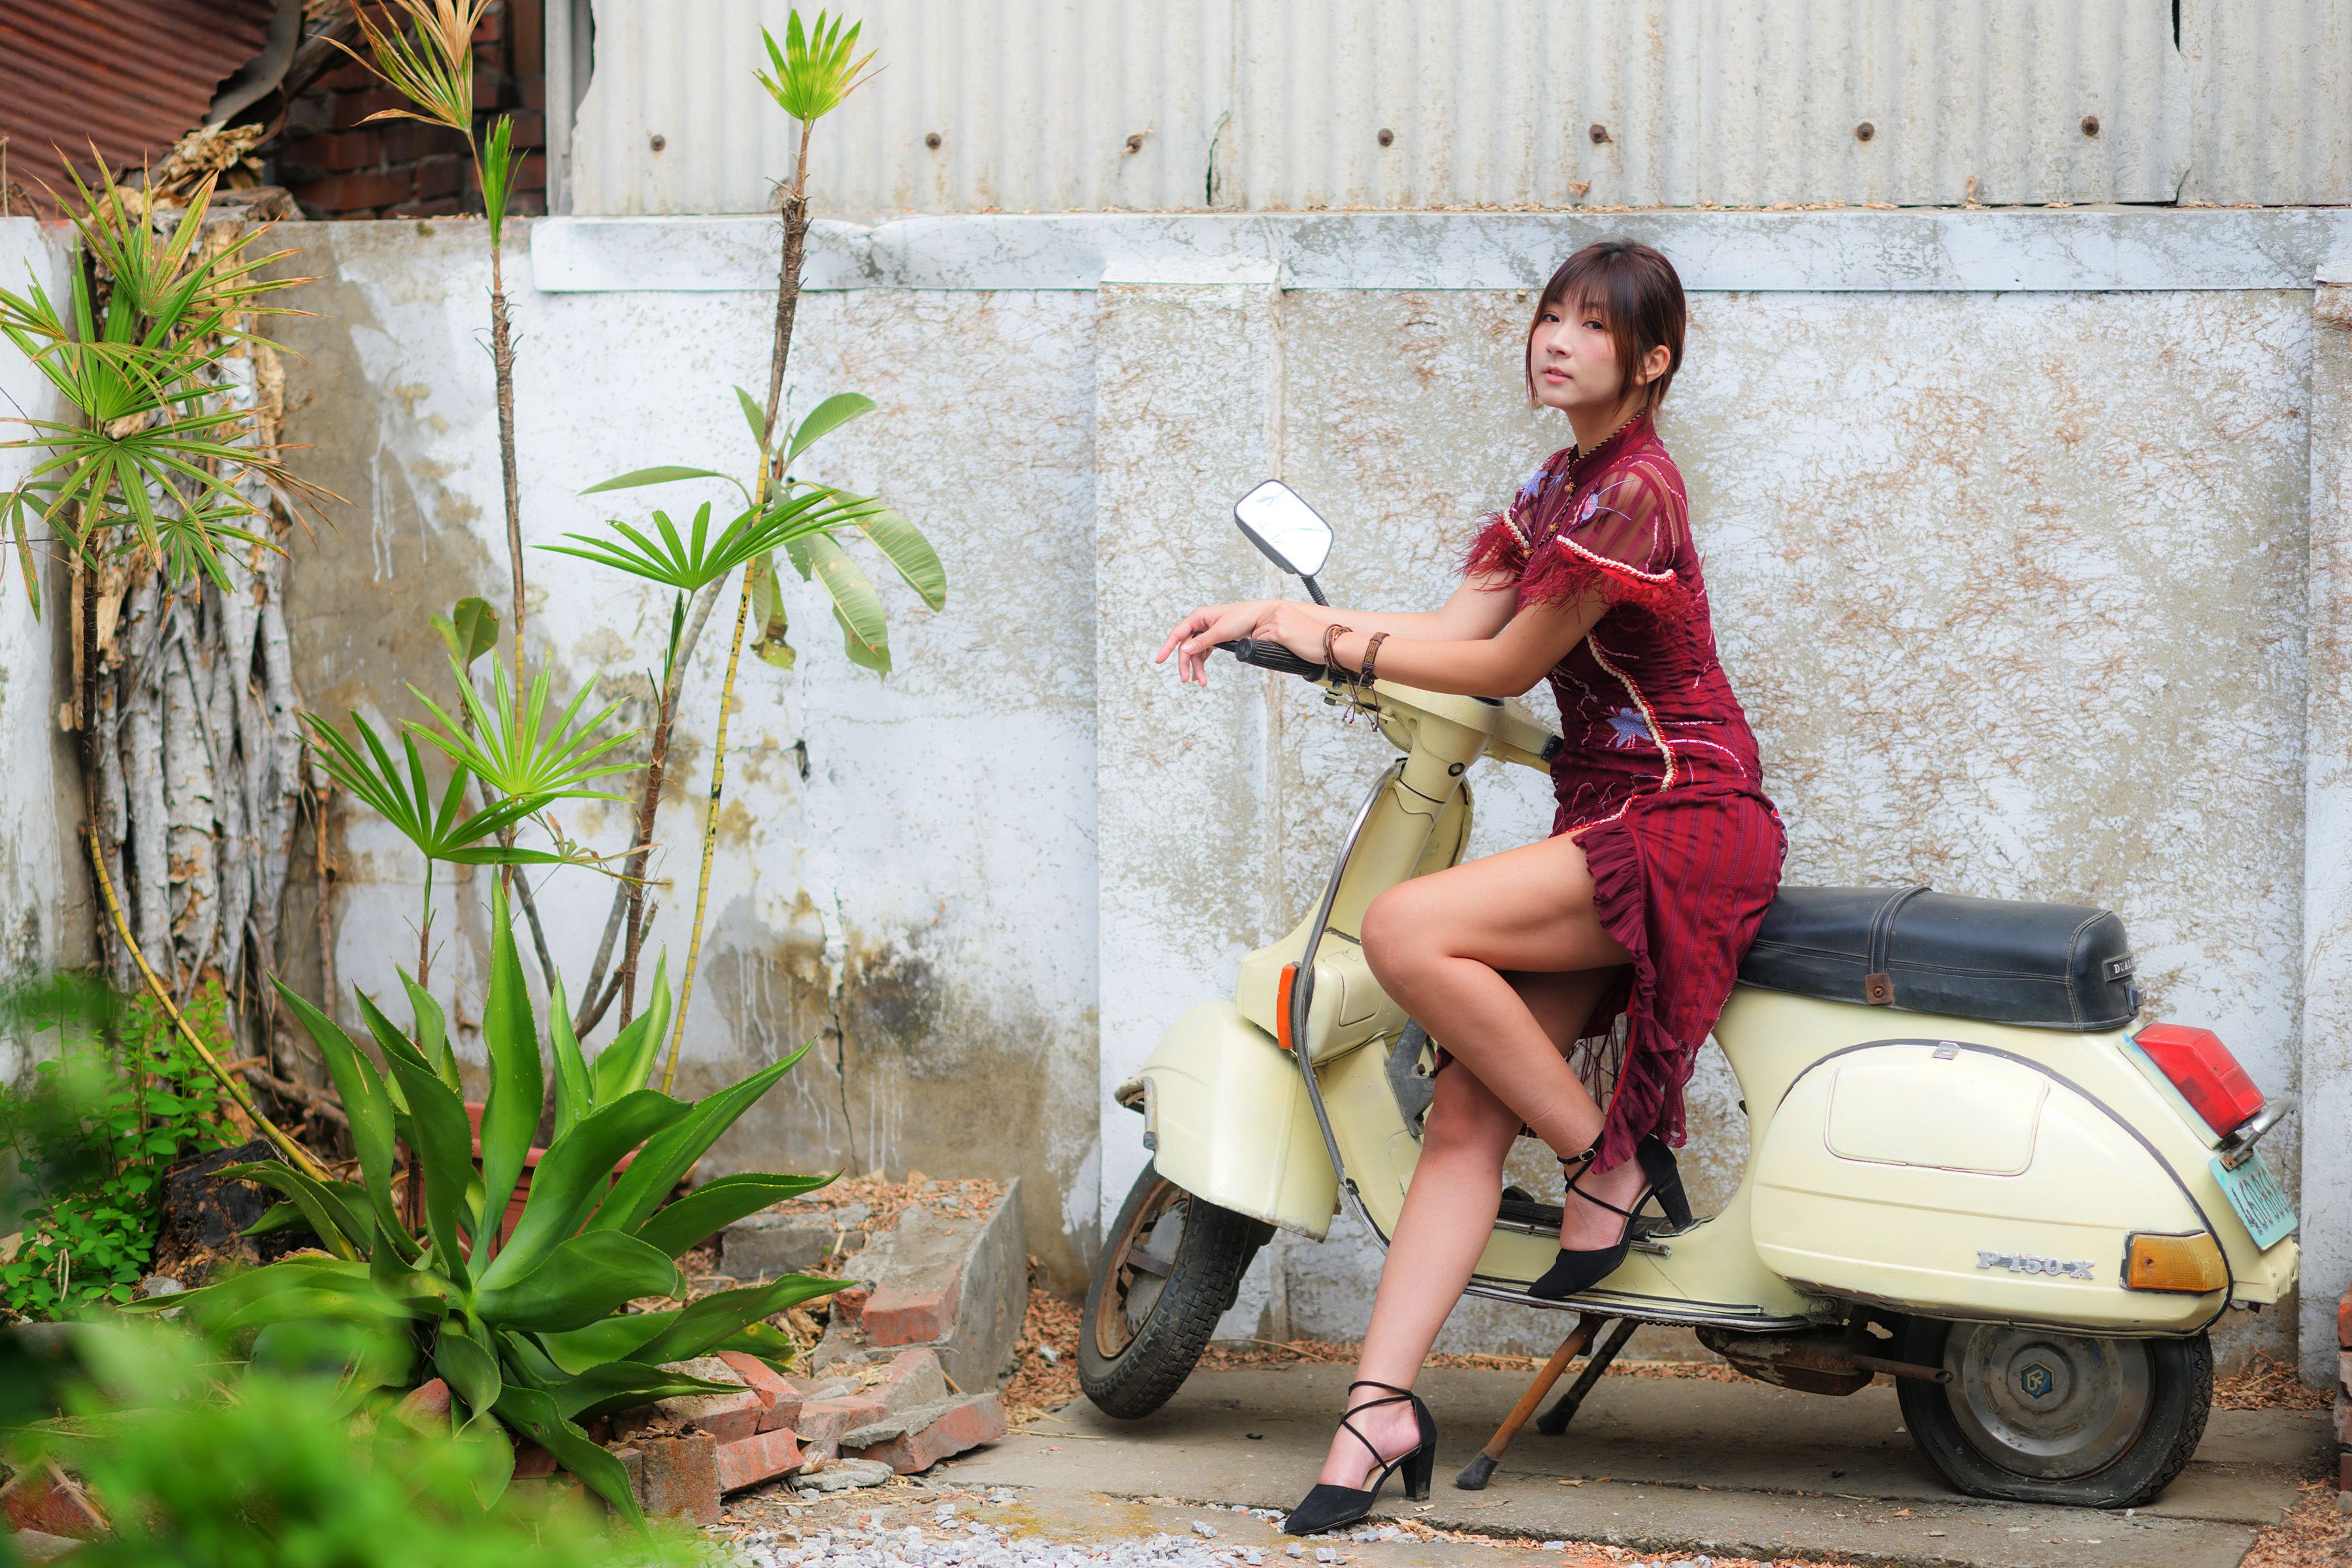 People 3600x2400 Asian model women long hair brunette sitting Vespa dress ponytail plants wall shoes women outdoors women with scooters scooters legs red clothing black heels looking at viewer